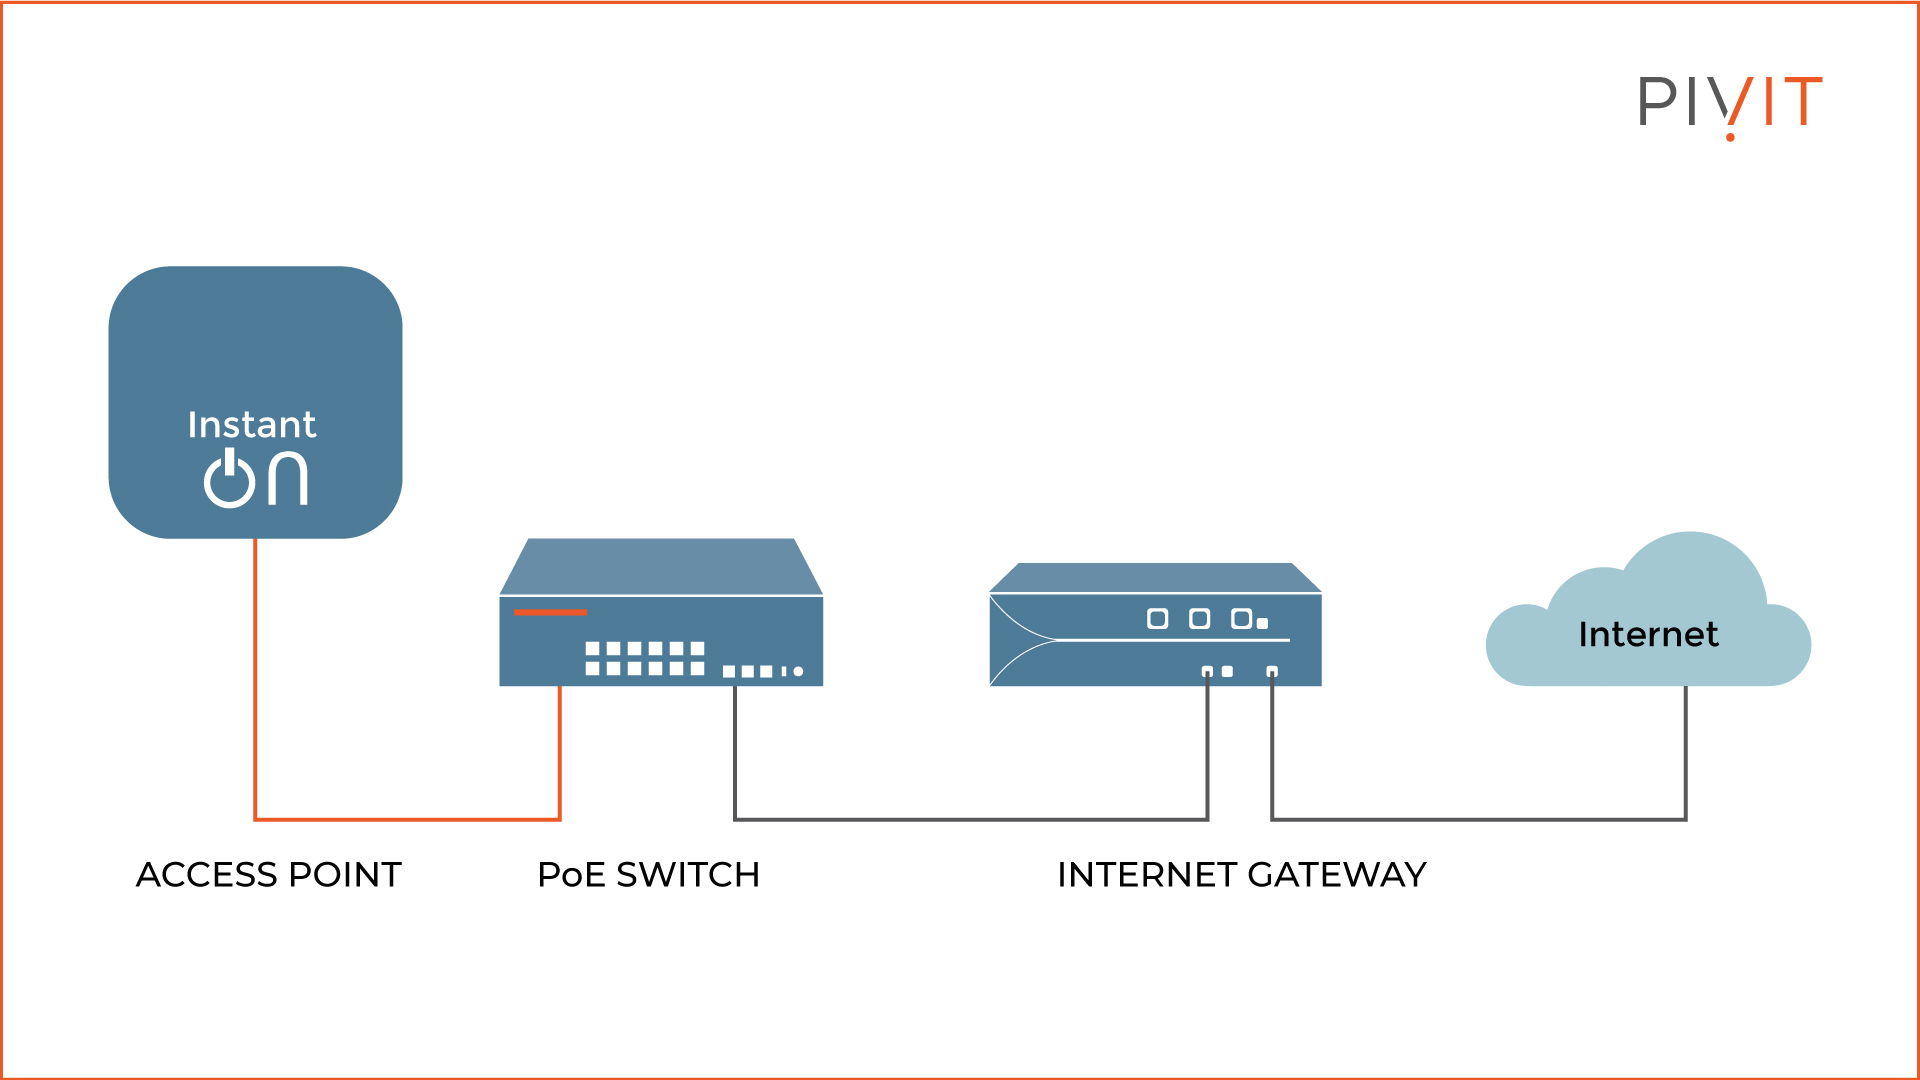 The Instant On access point is connected to a PoE switch and then to the internet through a gateway